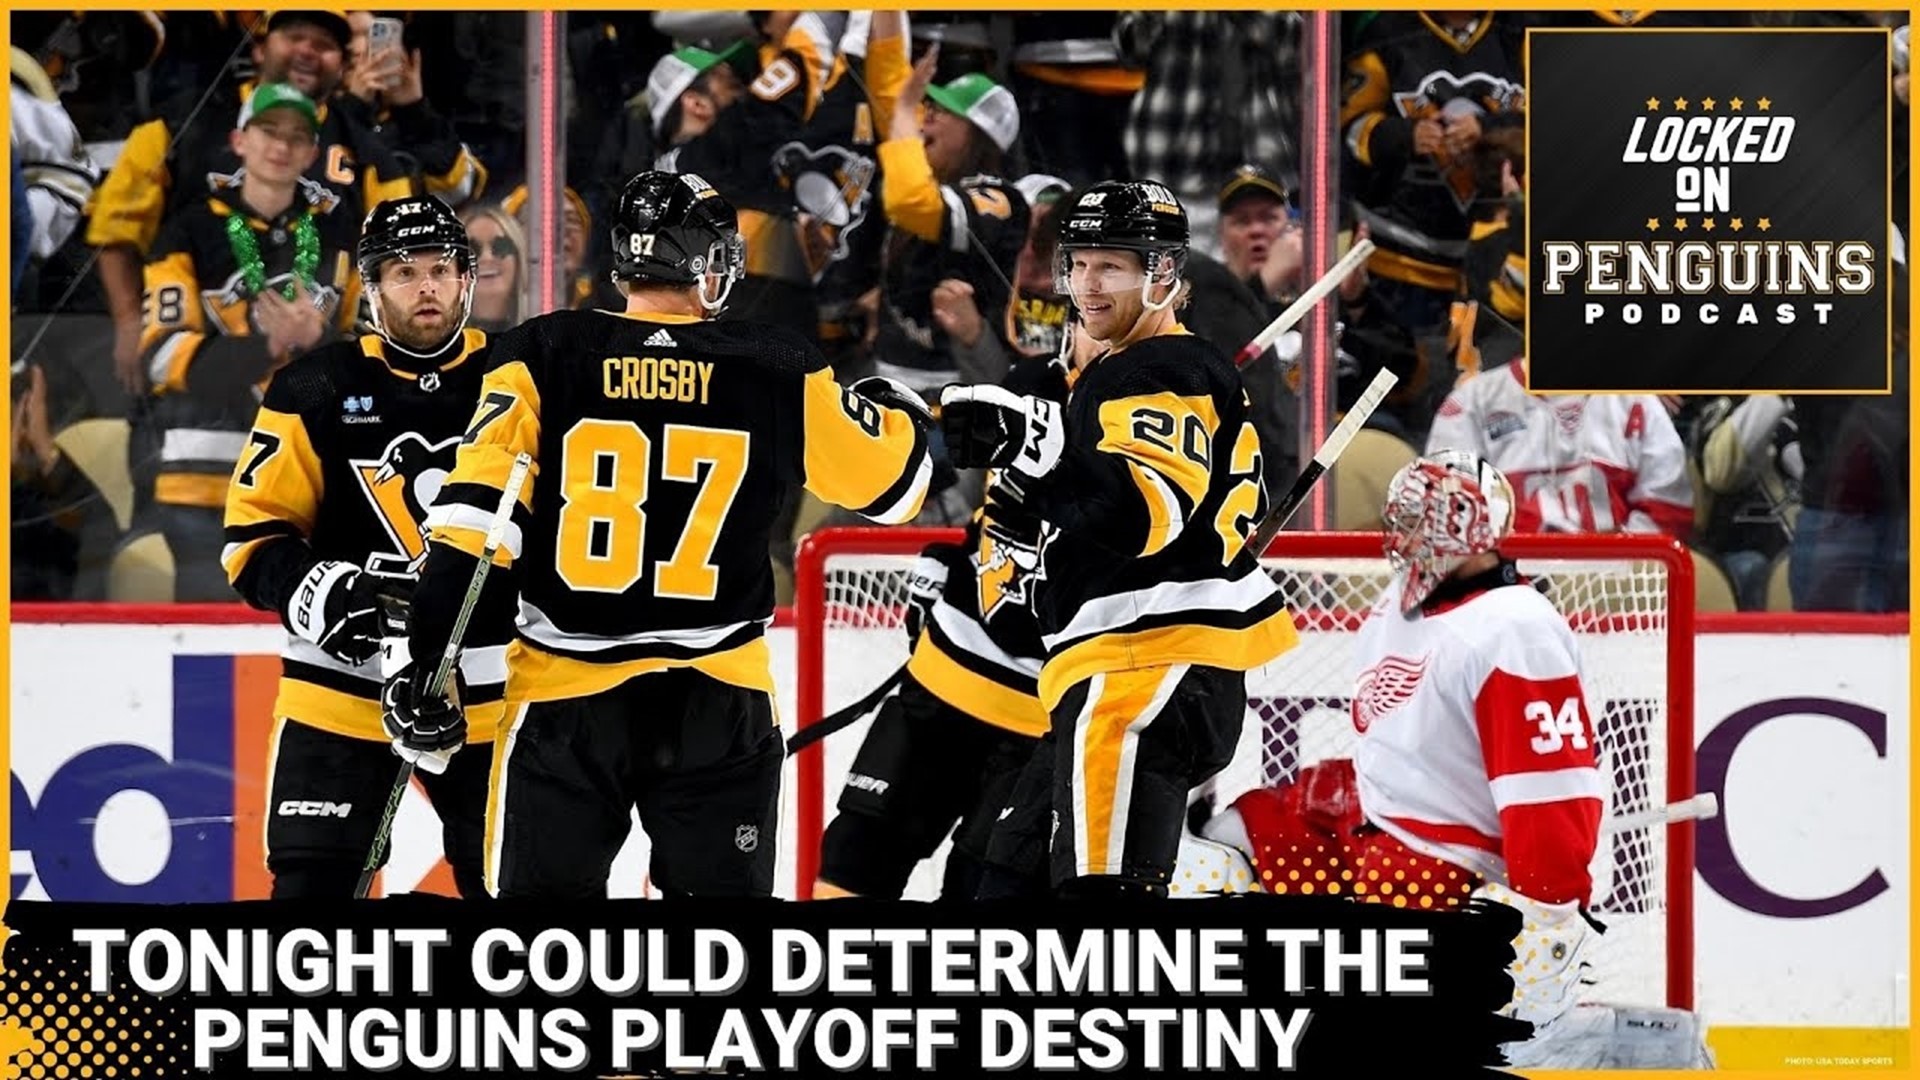 The Penguins are about to play their biggest game against the Red Wings since June 2009. On this episode, Patrick and Hunter preview the game.